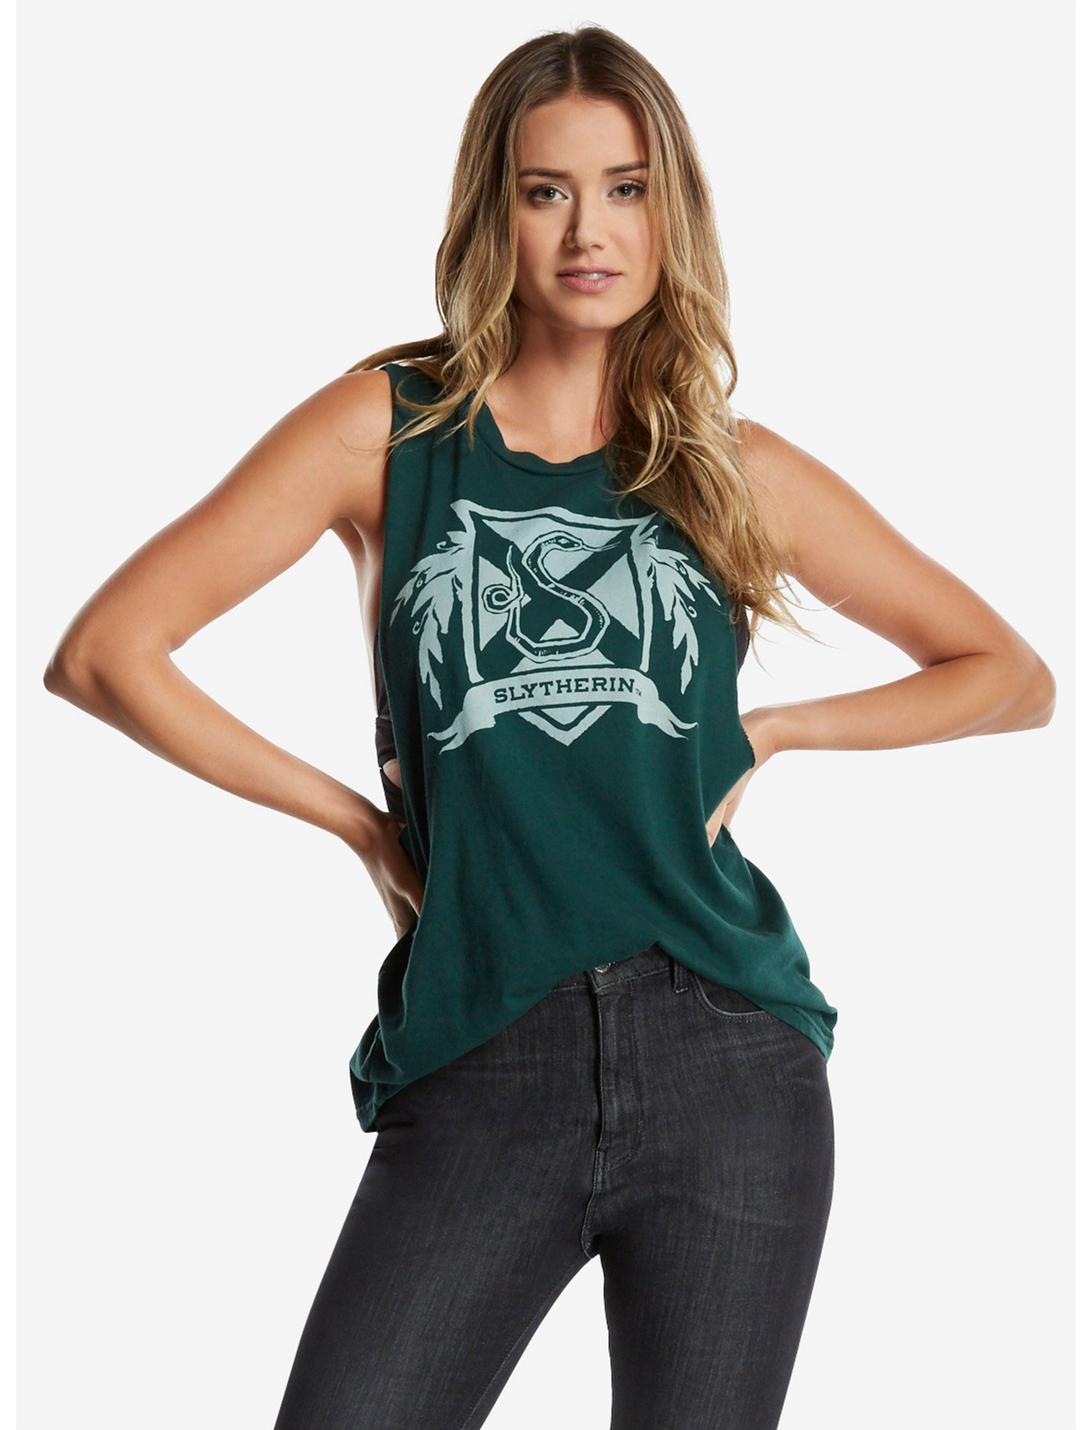 Harry Potter Slytherin Crest Womens Muscle Top, GREEN, hi-res